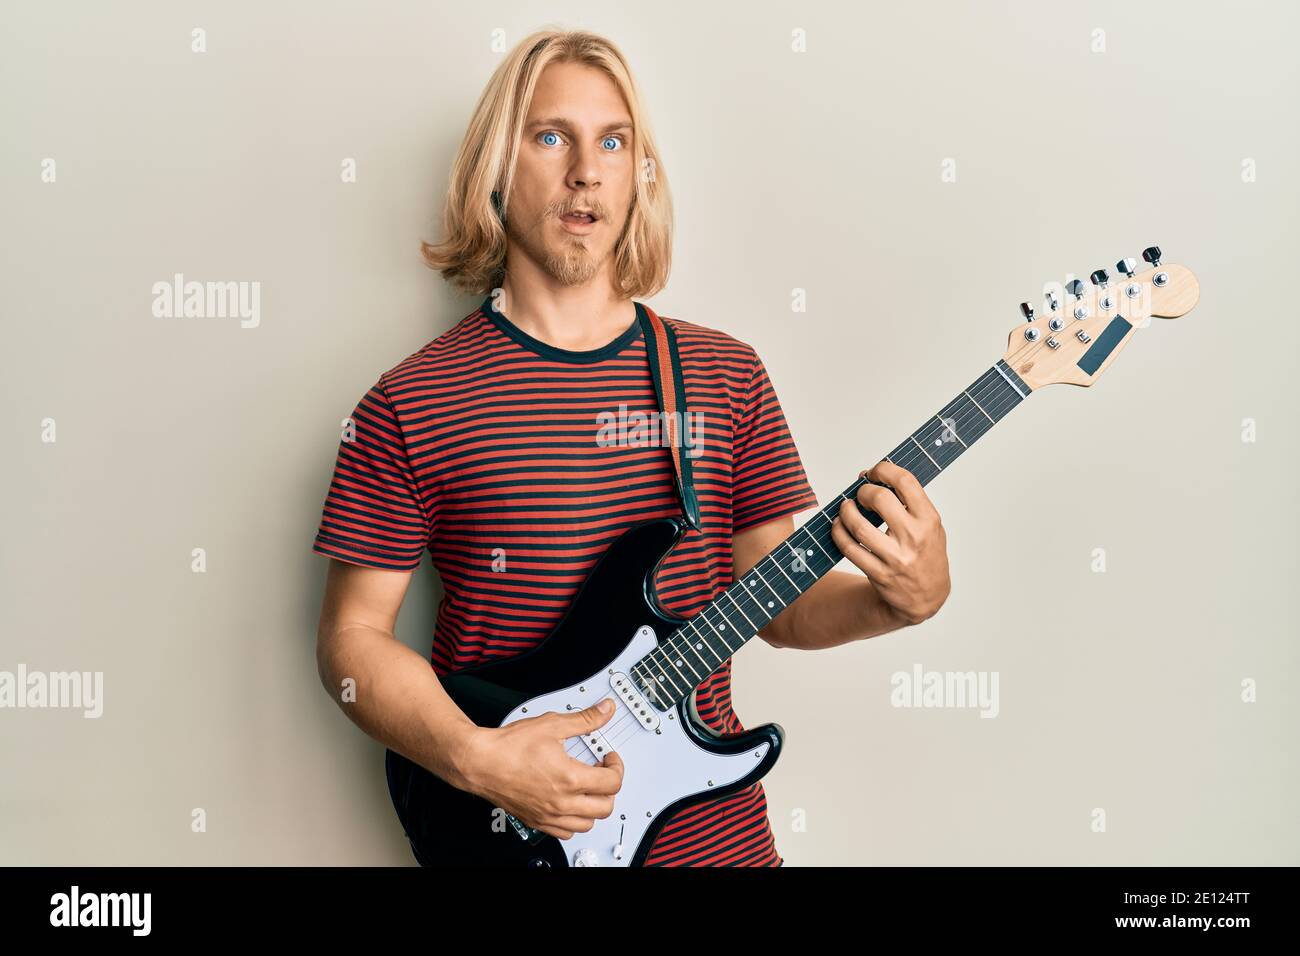 Caucasian young man with long hair playing electric guitar in shock face,  looking skeptical and sarcastic, surprised with open mouth Stock Photo -  Alamy